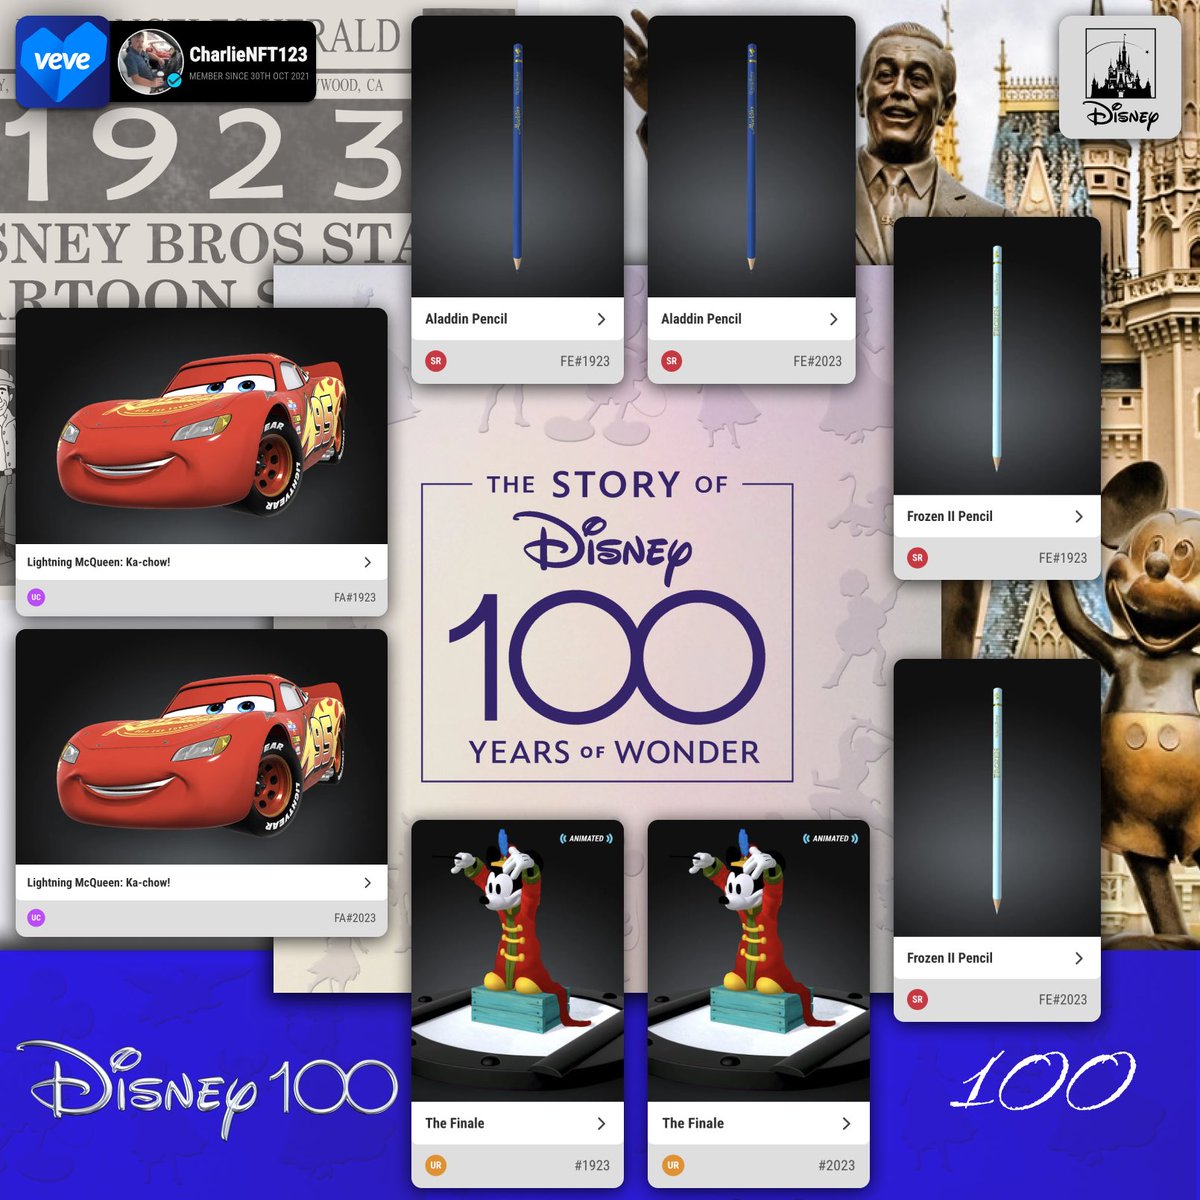 🏰 Dive into Disney history! Founded on October 16, 1923, by brothers Walt Disney and Roy Disney, Disney Brothers Studio paved the way for magical storytelling. ✨ #Disney100 #DisneyHistory 🎬 #DigitalCollectibles @veve_official #CollectorsAtHeart 💙 #veve #vevefam